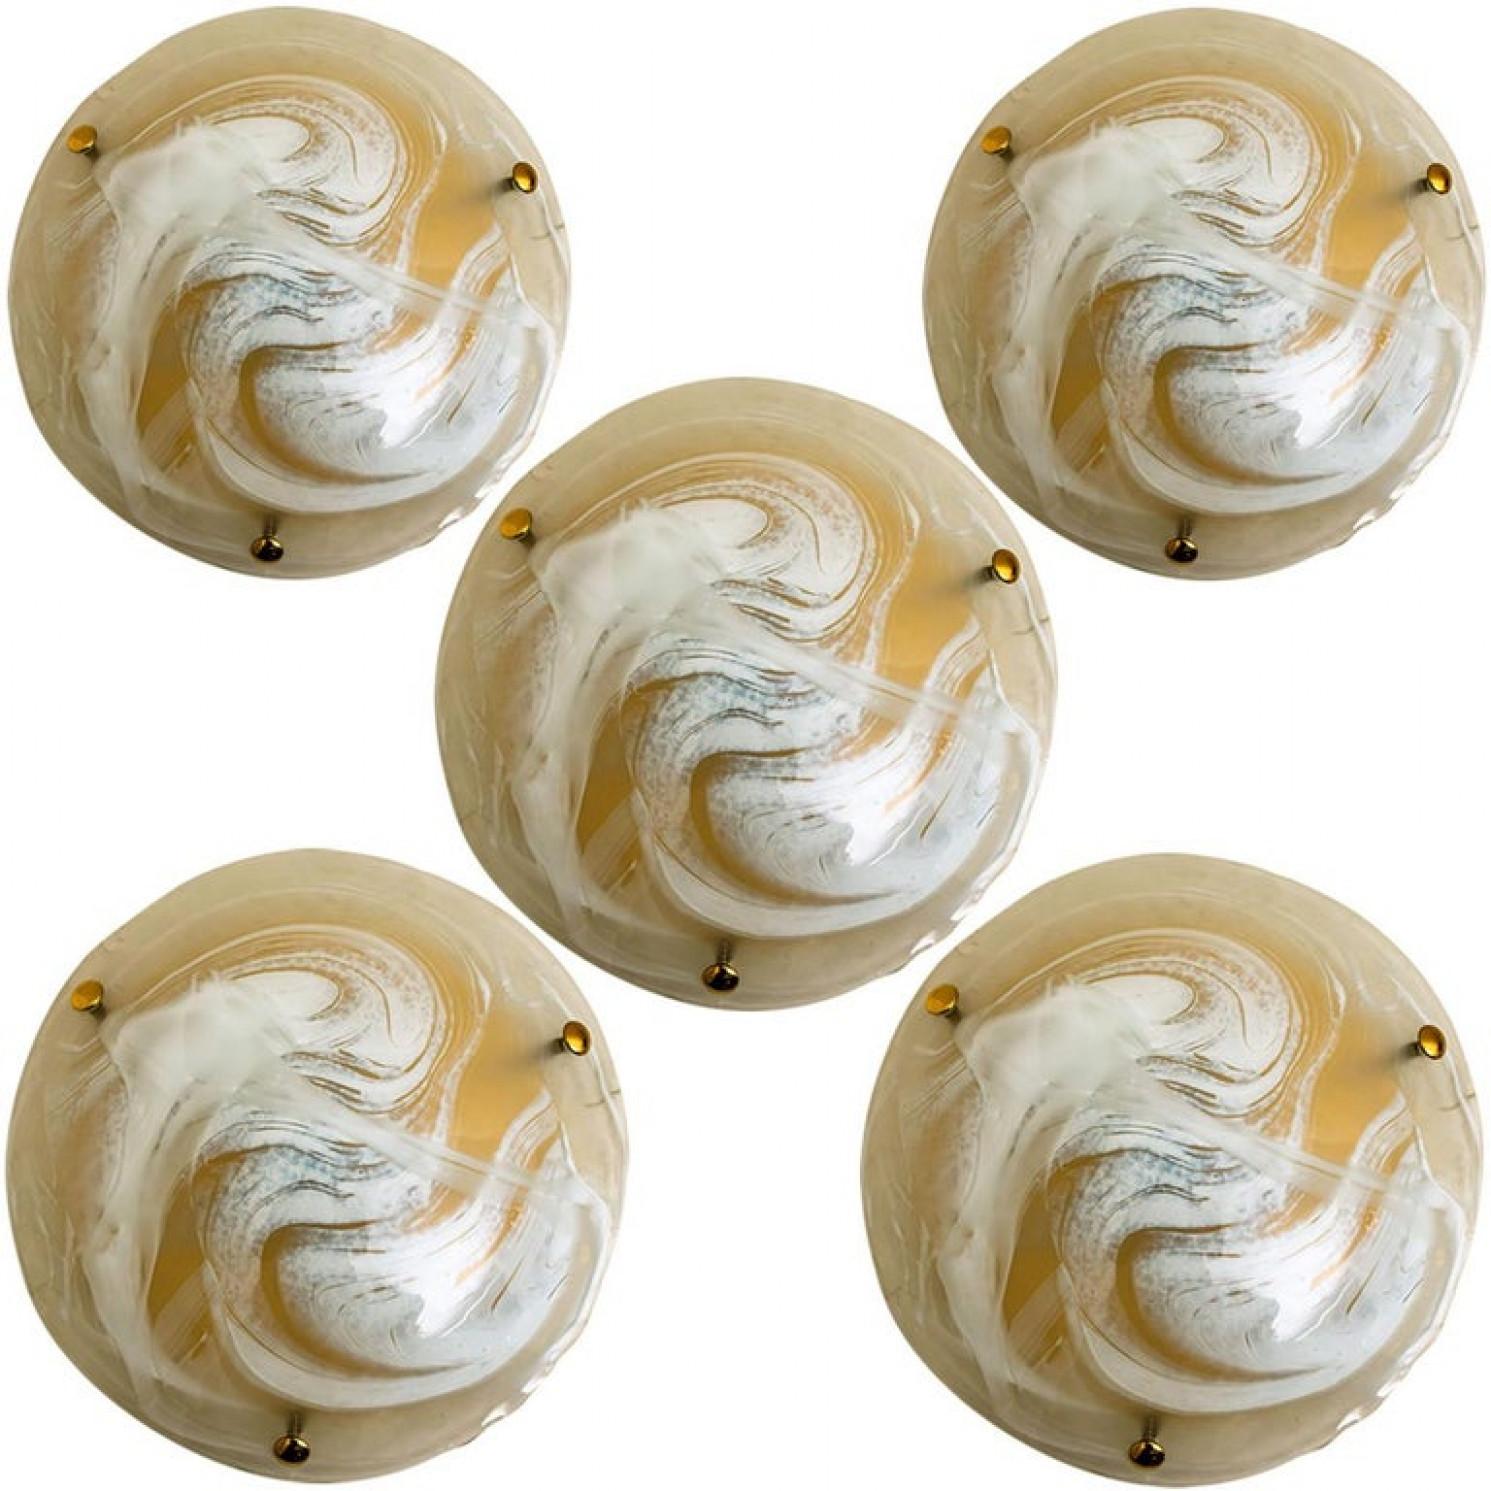 One of the ten high quality modern thick textured ice glass flush mount or wall lights by Hillebrand, circa 1965.

Each light fixture is featuring a huge round blown glass dish. Can work as impressive wall lights but also as flush mounts.
Two sizes: